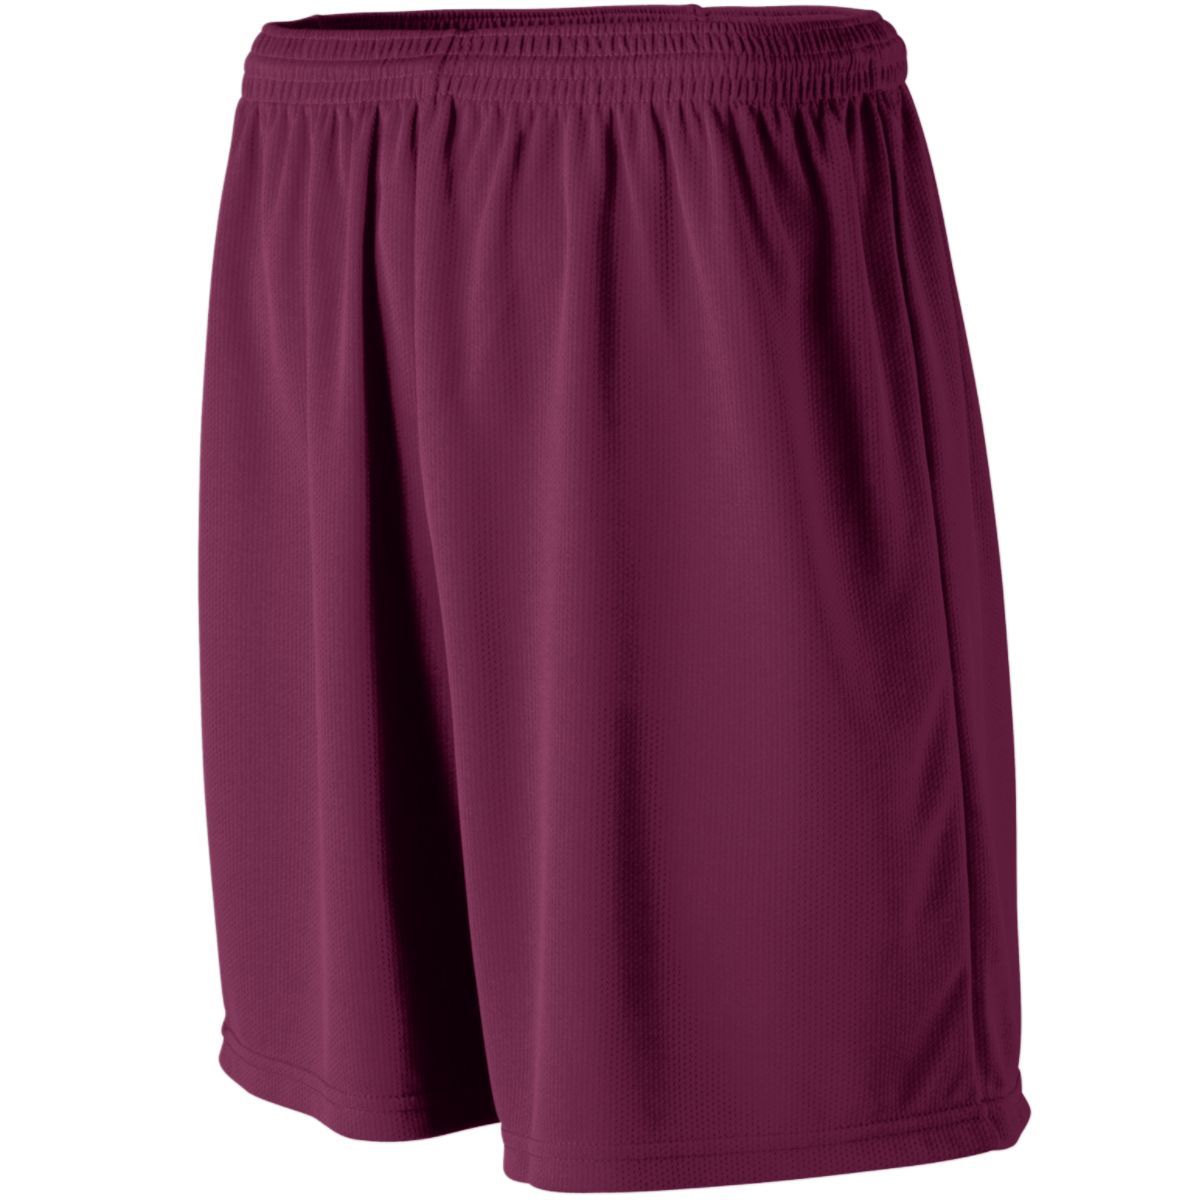 Augusta Sportswear Wicking Mesh Athletic Shorts in Maroon  -Part of the Adult, Adult-Shorts, Augusta-Products product lines at KanaleyCreations.com